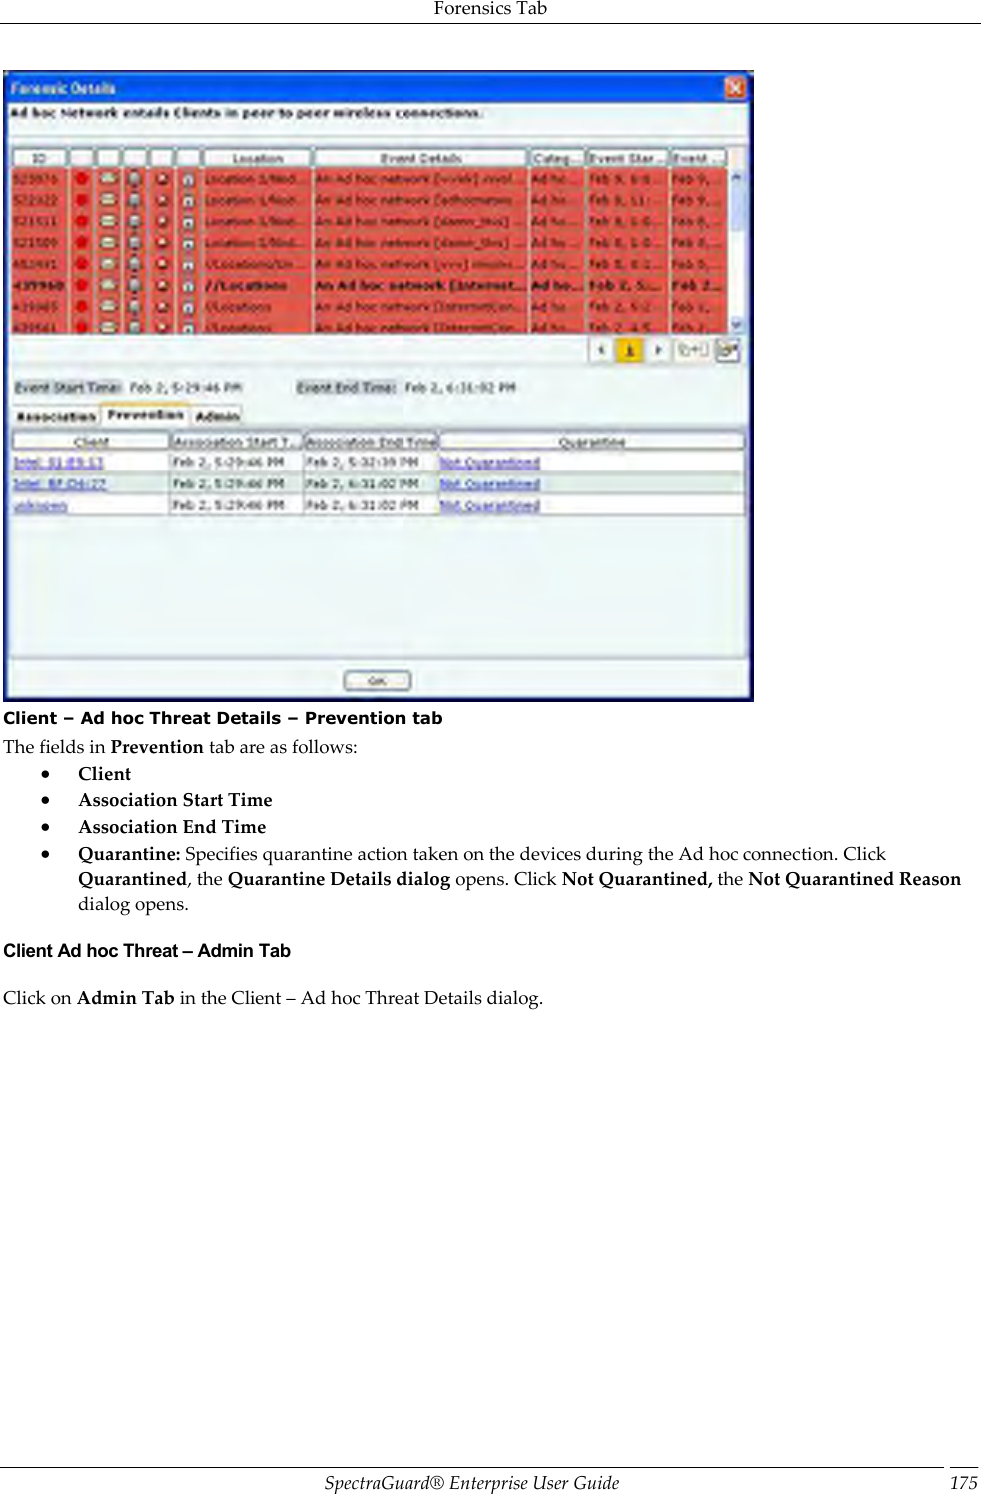 Forensics Tab SpectraGuard®  Enterprise User Guide 175  Client – Ad hoc Threat Details – Prevention tab The fields in Prevention tab are as follows:  Client  Association Start Time  Association End Time  Quarantine: Specifies quarantine action taken on the devices during the Ad hoc connection. Click Quarantined, the Quarantine Details dialog opens. Click Not Quarantined, the Not Quarantined Reason dialog opens. Client Ad hoc Threat – Admin Tab Click on Admin Tab in the Client – Ad hoc Threat Details dialog. 